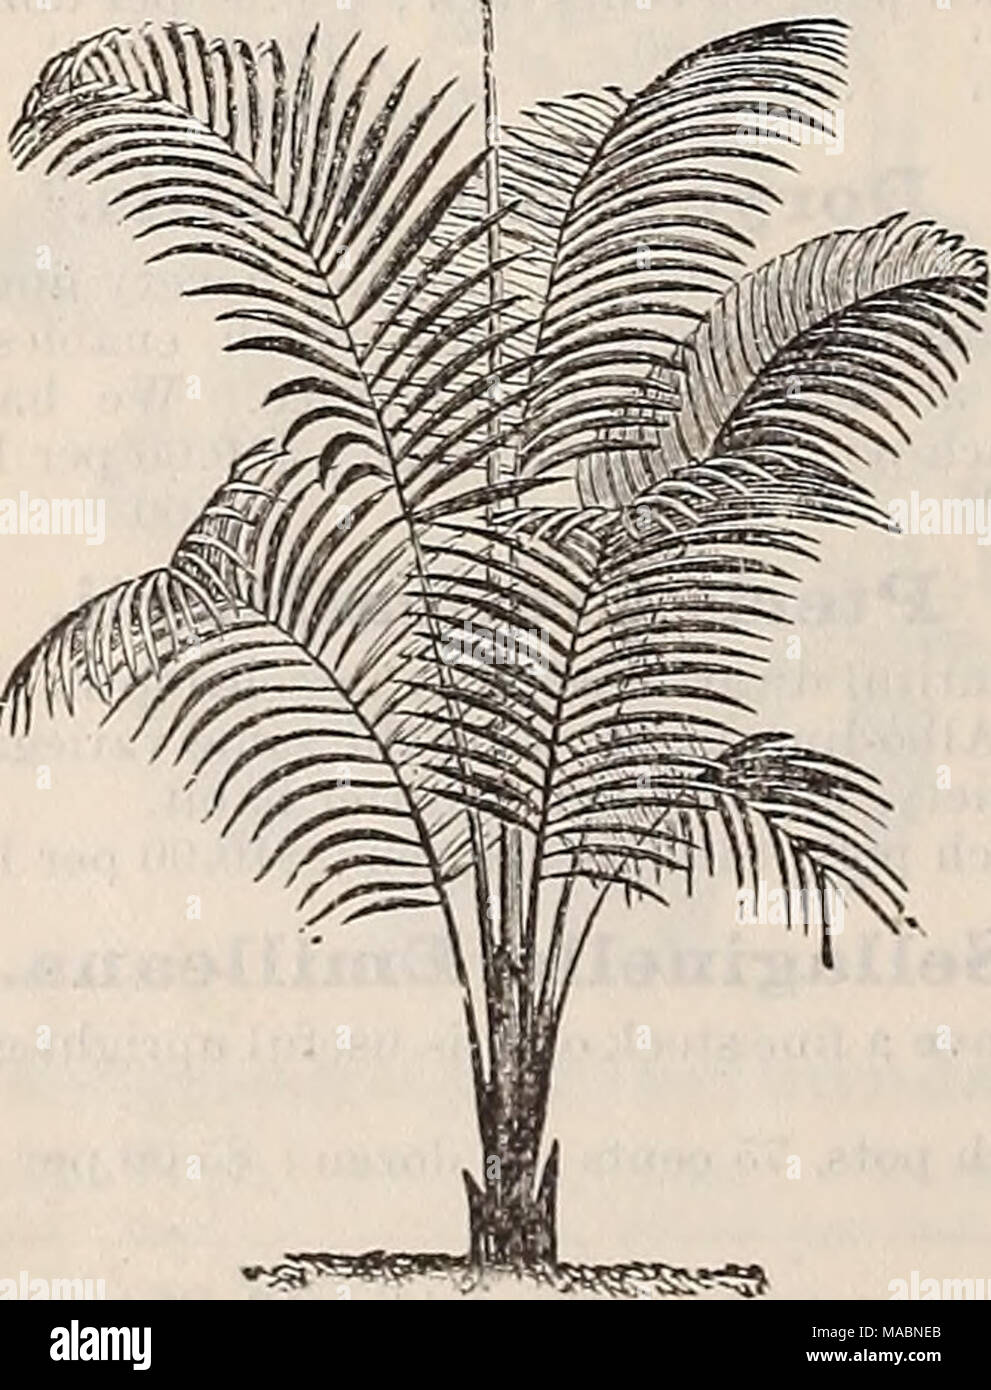 . Dreer's quarterly wholesale price list of seeds, plants, bulbs, &amp;c. : summer edition July 1895 August . Cocos Weddelliana. Areca Lutescens, Inches high. Per doz. Per 100. 2 inch pots 6 to 8$ 75 $6 00 3 &quot; &quot; 12 to 15 125 10 00 6 &quot; &quot; (3 plants in a pot) 20 to 24 12 00 100 00 Specimen Plants of Areca Lutescens. 12 inch pots, 6 to 8 feet high, single stems, fine plants for decorating, $7.50 each. 12 inch pots, 6 to .7 feet high, single stems, with several good side branches, S10.00 each. 12 inch pots, 6 feet high, bushy well-formed speci- mens of good value, $12.50 each.  Stock Photo